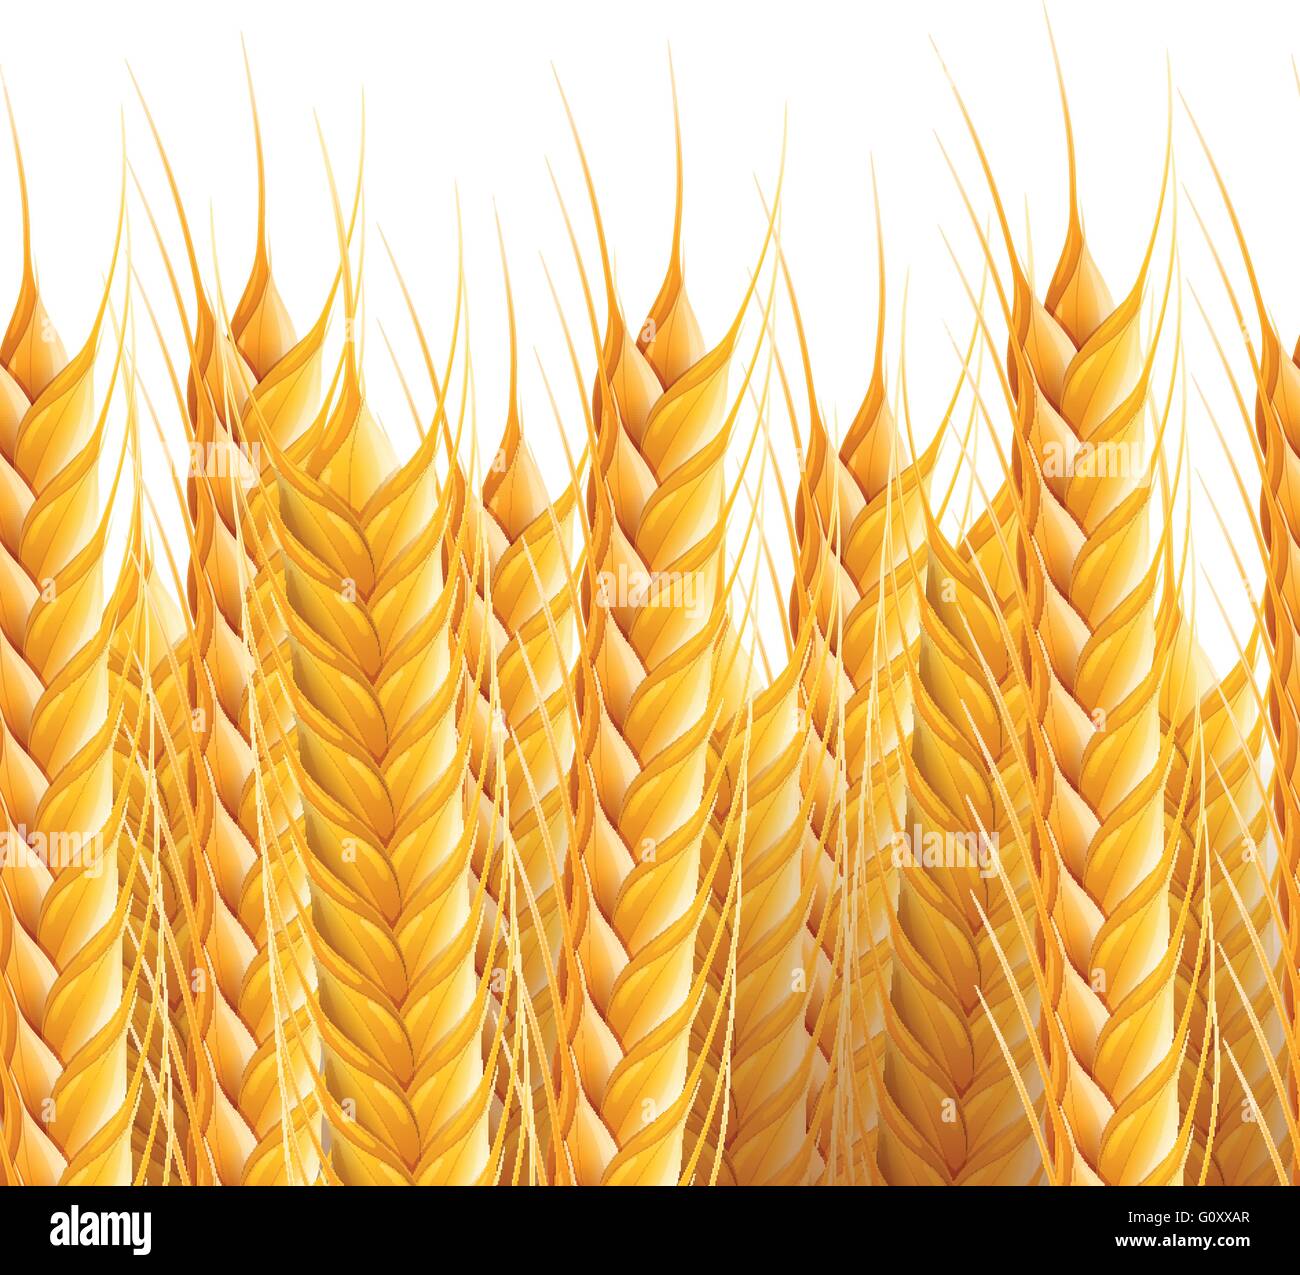 Vector realistic seamless wheat background illustration. Stock Vector